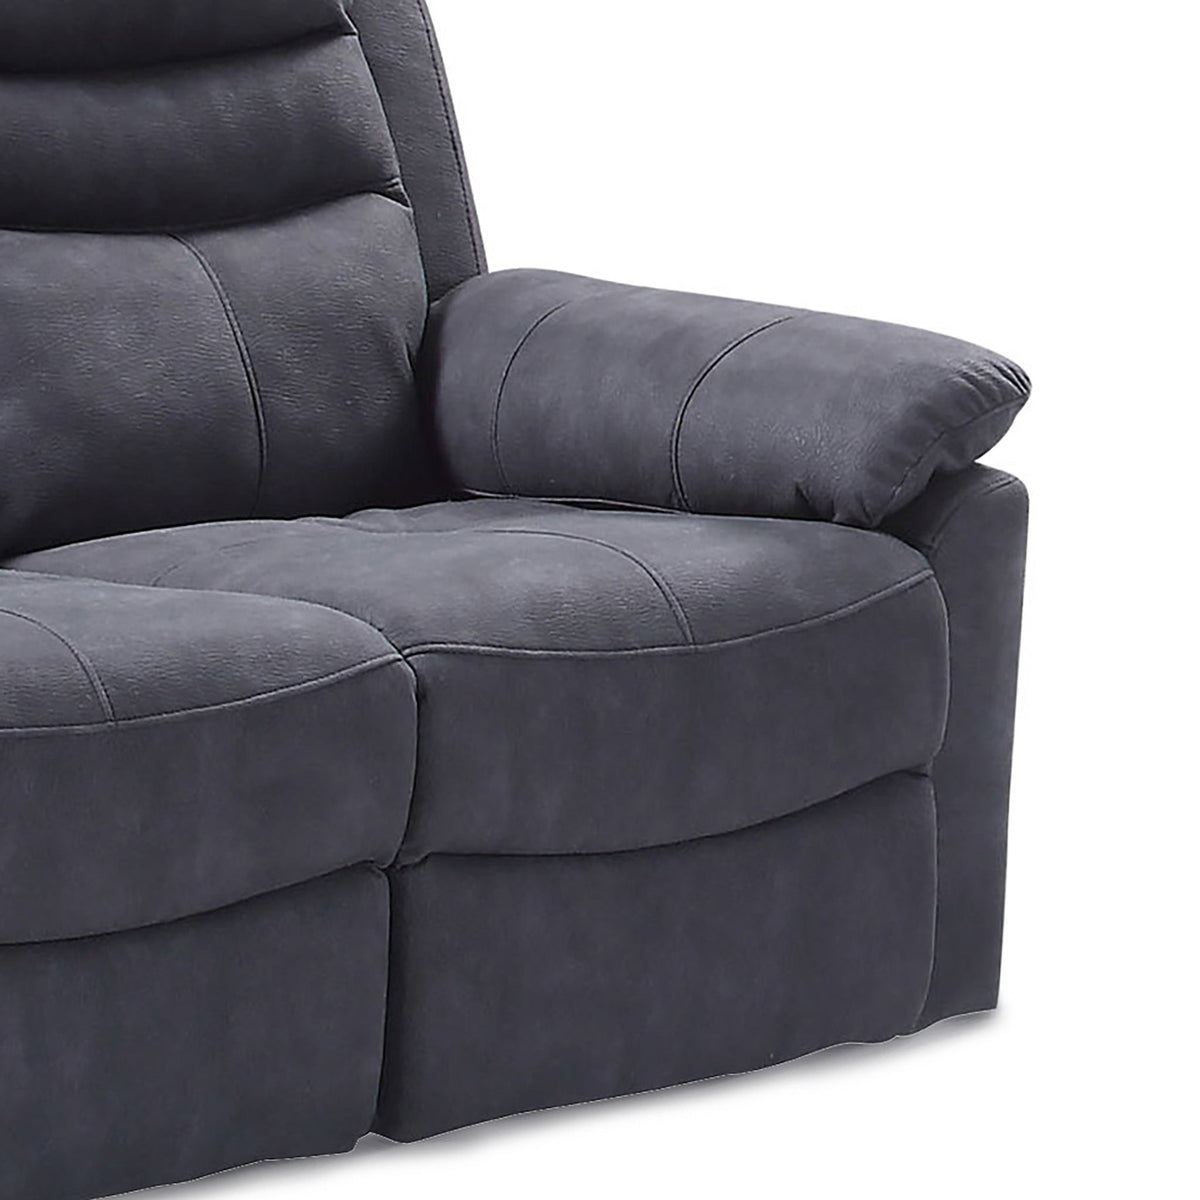 Conway Charcoal 2 Seater Recliner Sofa - Close up of  arm rest